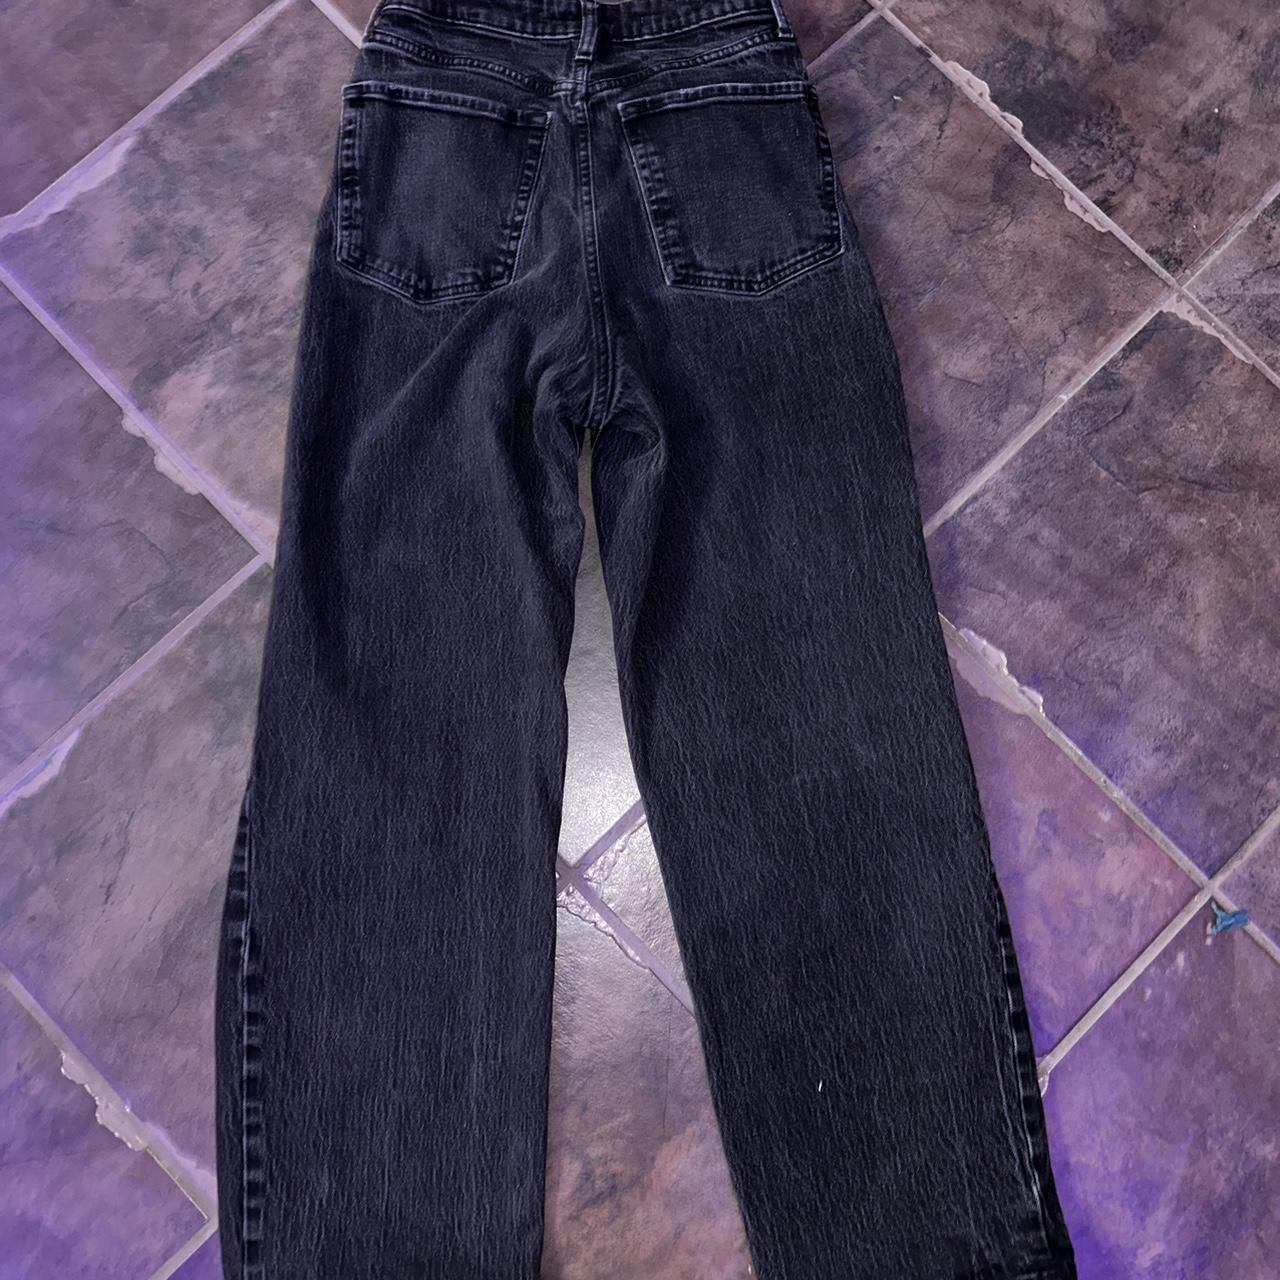 black wild fable jeans, high rise and baggy holes - Depop